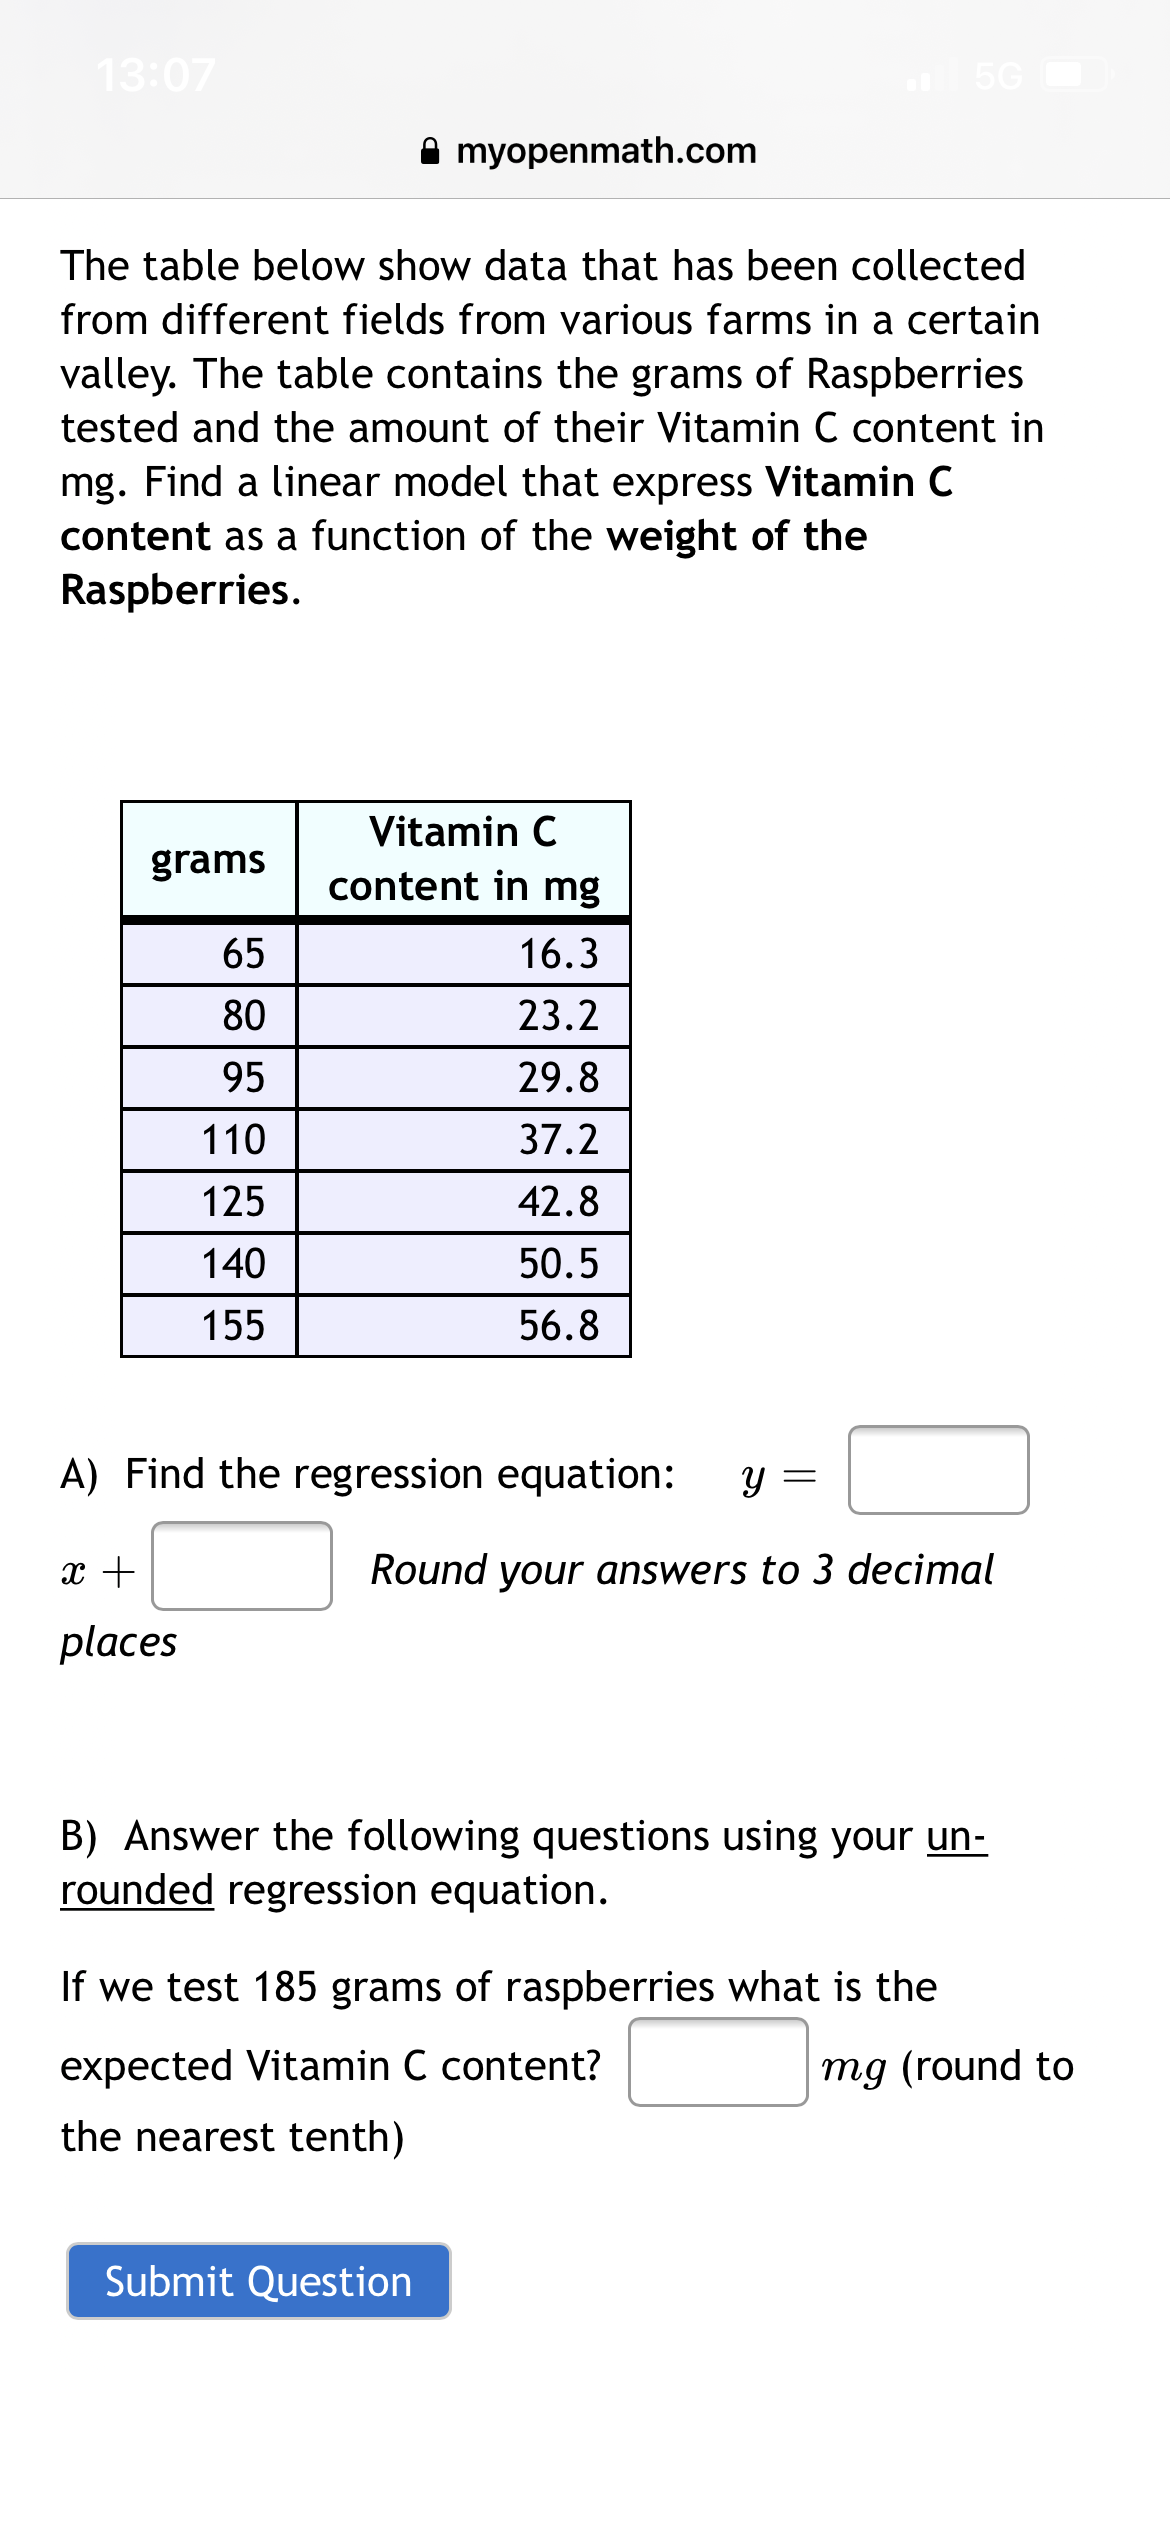 13:07
A myopenmath.com
The table below show data that has been collected
from different fields from various farms in a certain
valley. The table contains the grams of Raspberries
tested and the amount of their Vitamin C content in
mg. Find a linear model that express Vitamin C
content as a function of the weight of the
Raspberries.
Vitamin C
grams
content in mg
65
16.3
80
23.2
95
29.8
110
37.2
125
42.8
140
50.5
155
56.8
A) Find the regression equation:
Y =
x +
Round your answers to 3 decimal
places
B) Answer the following questions using your un-
rounded regression equation.
If we test 185 grams of raspberries what is the
expected Vitamin C content?
mg (round to
the nearest tenth)
Submit Question
